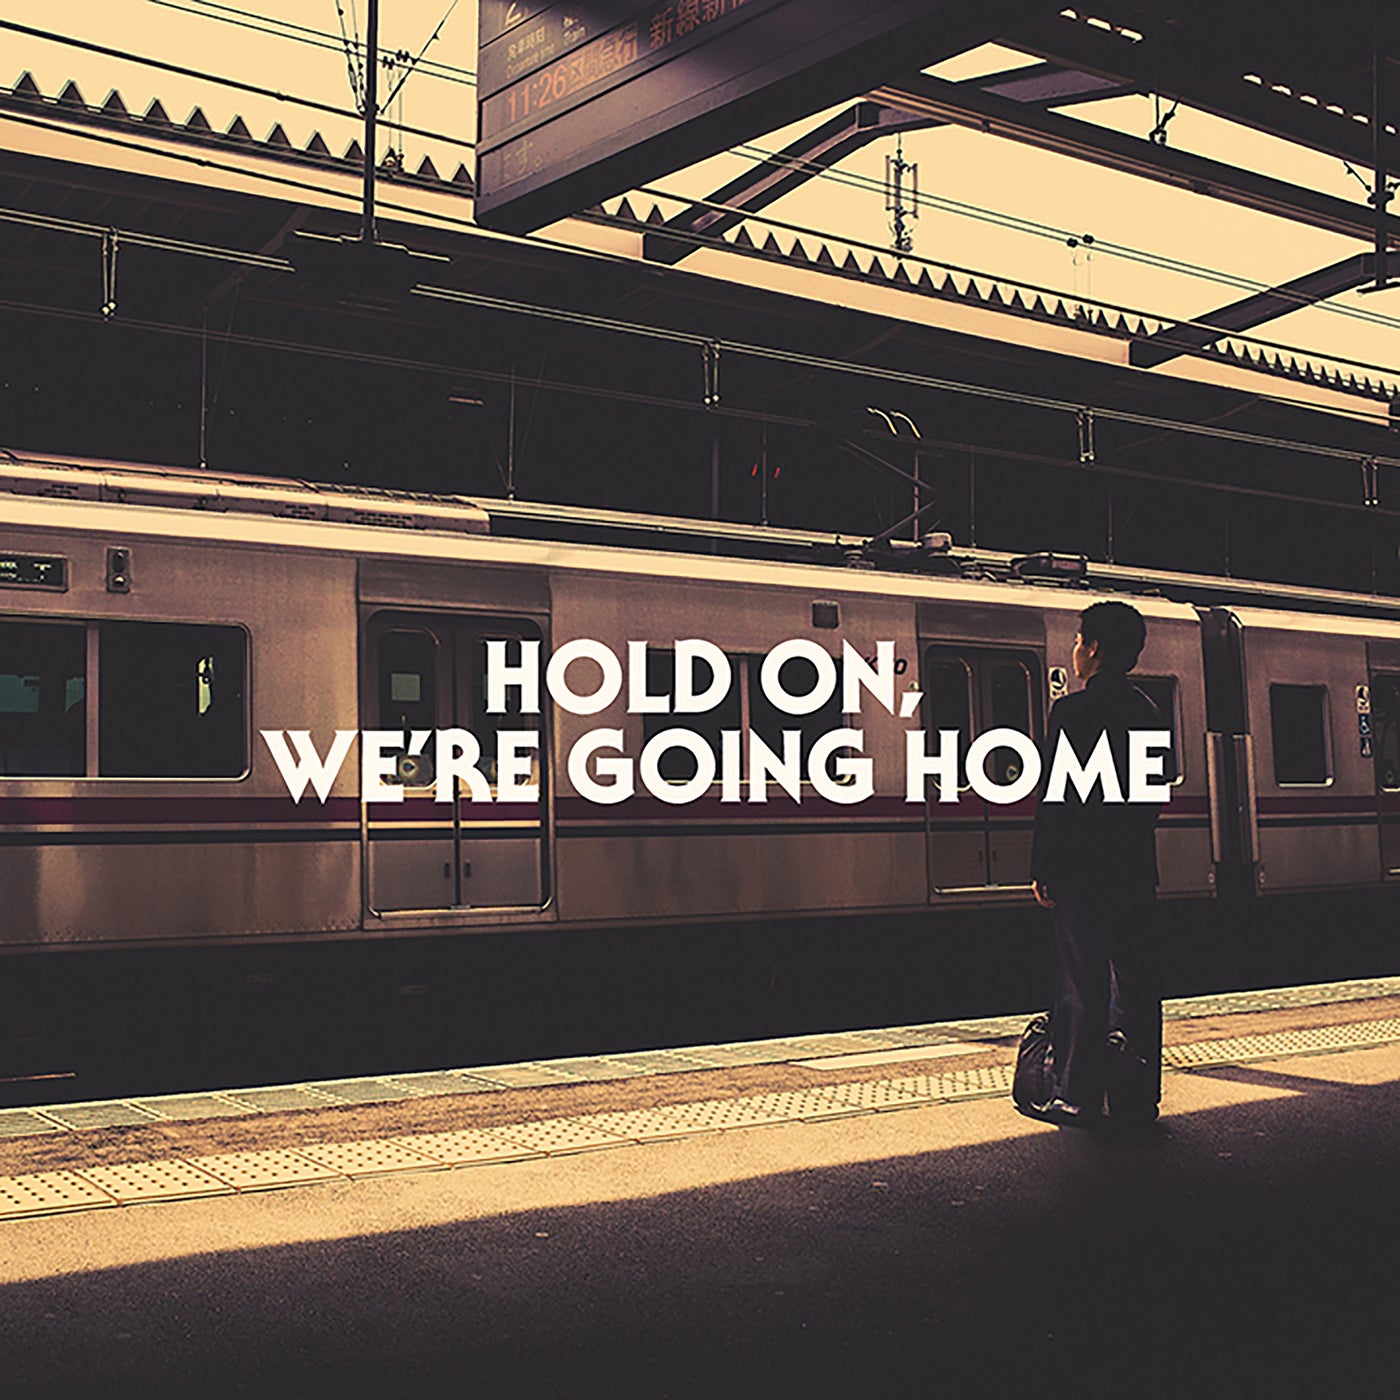 Going home music. Go Home. Going Home. Hold on we’re going Home. Go Home картинка.